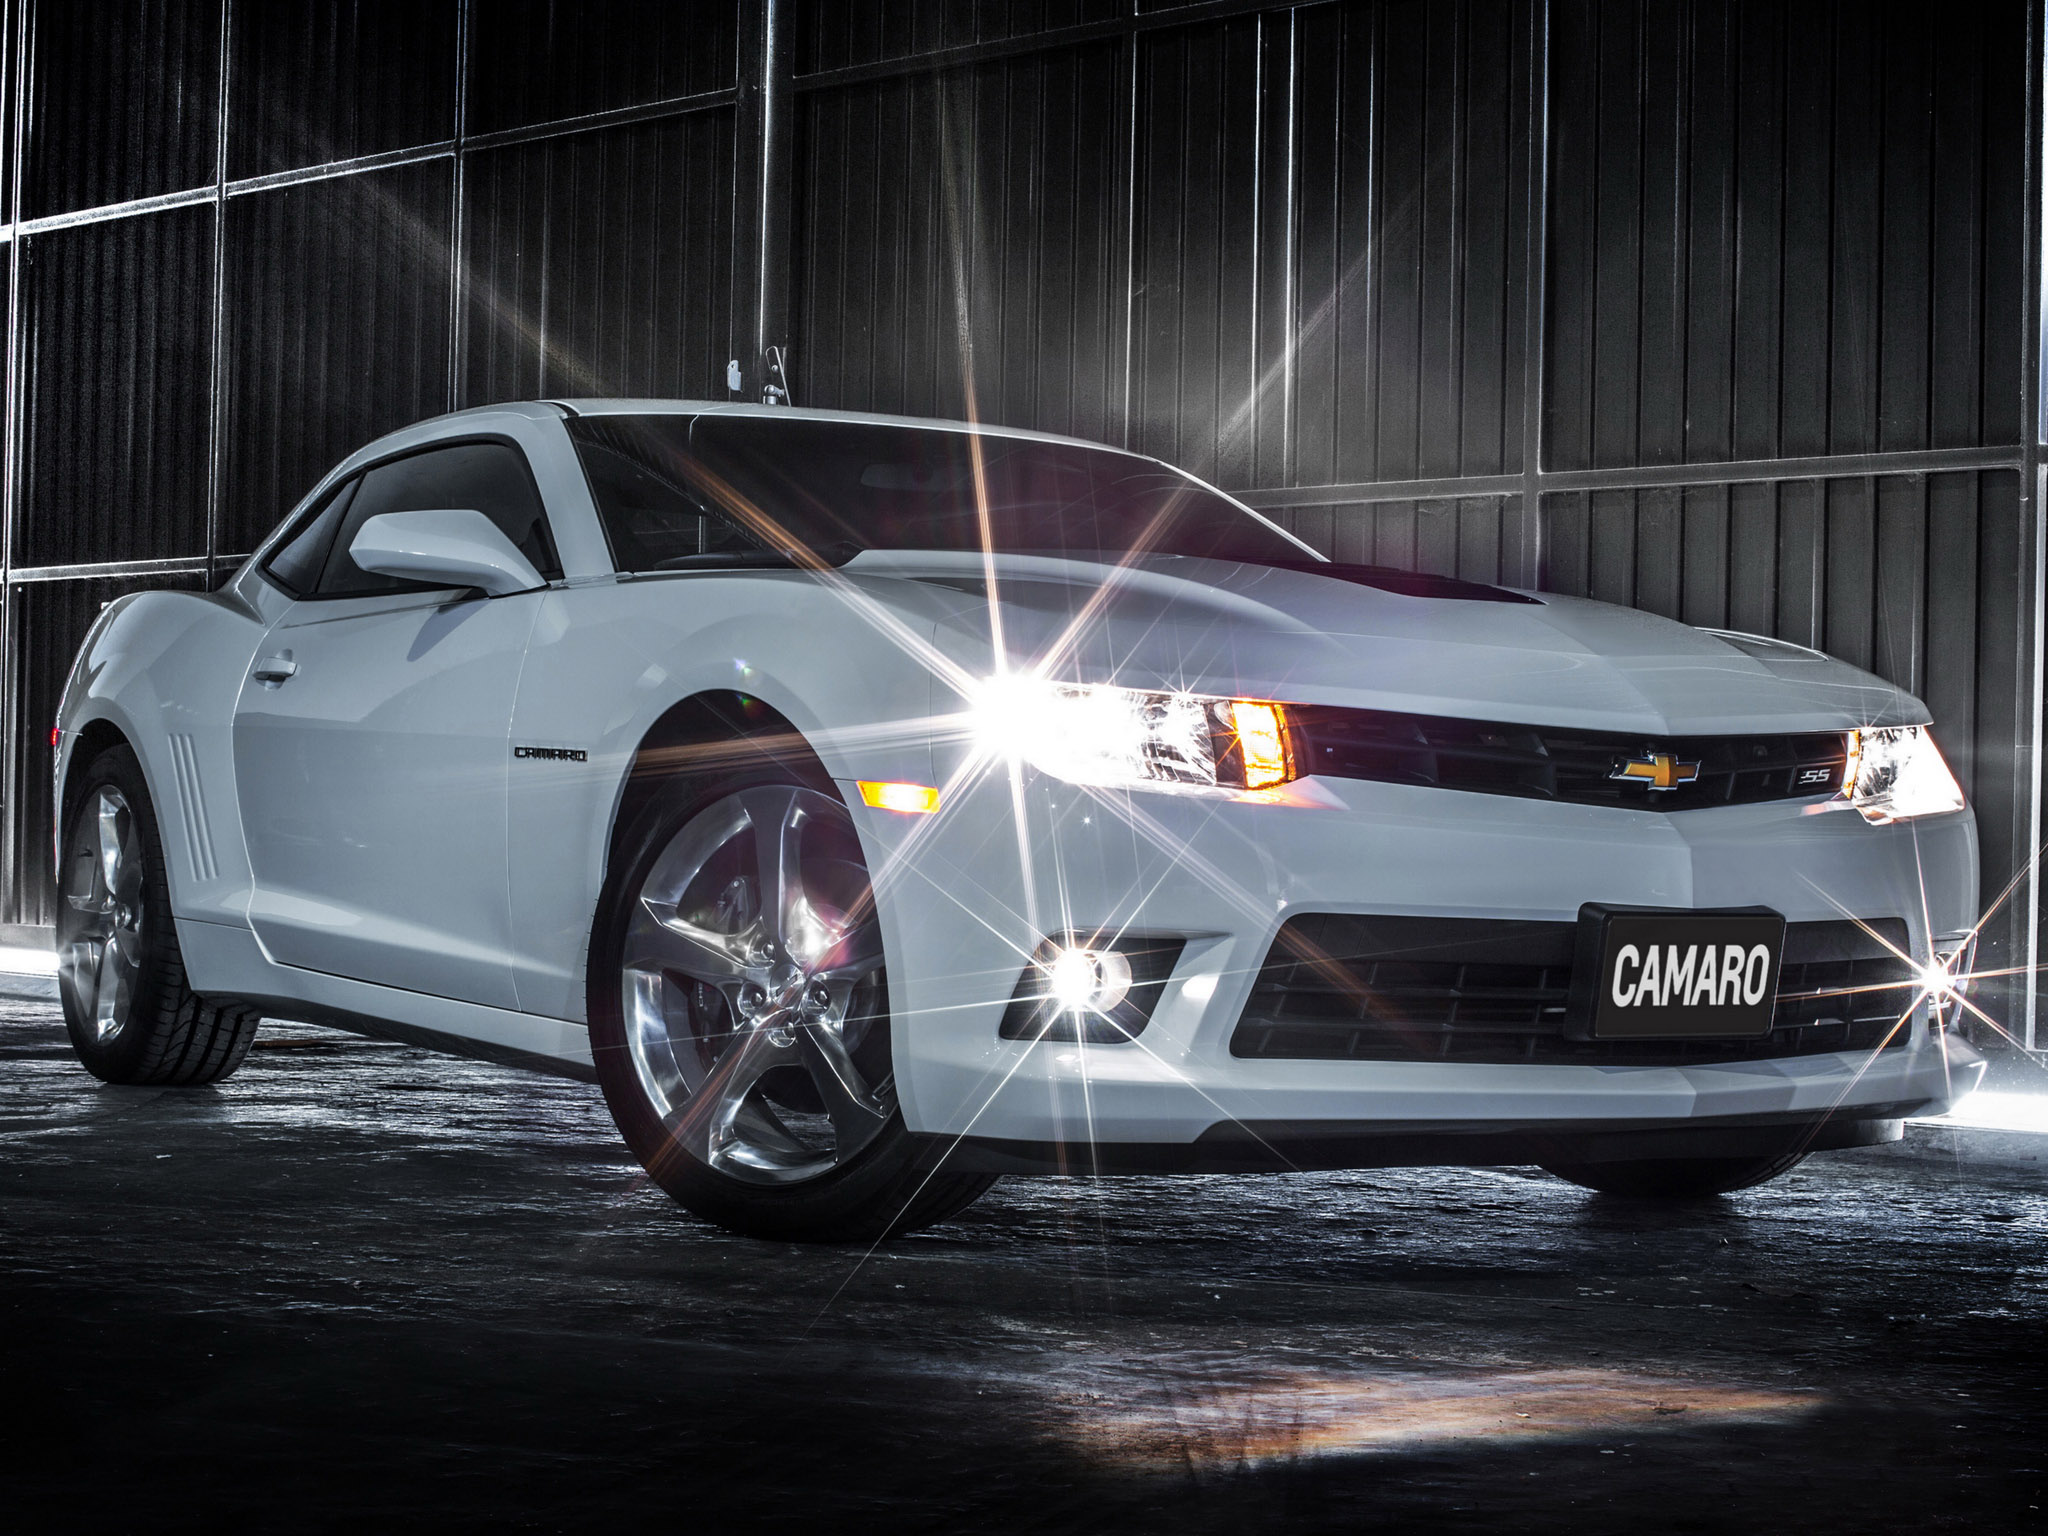 2013, Chevrolet, Camaro, Ss, Muscle, S s Wallpaper